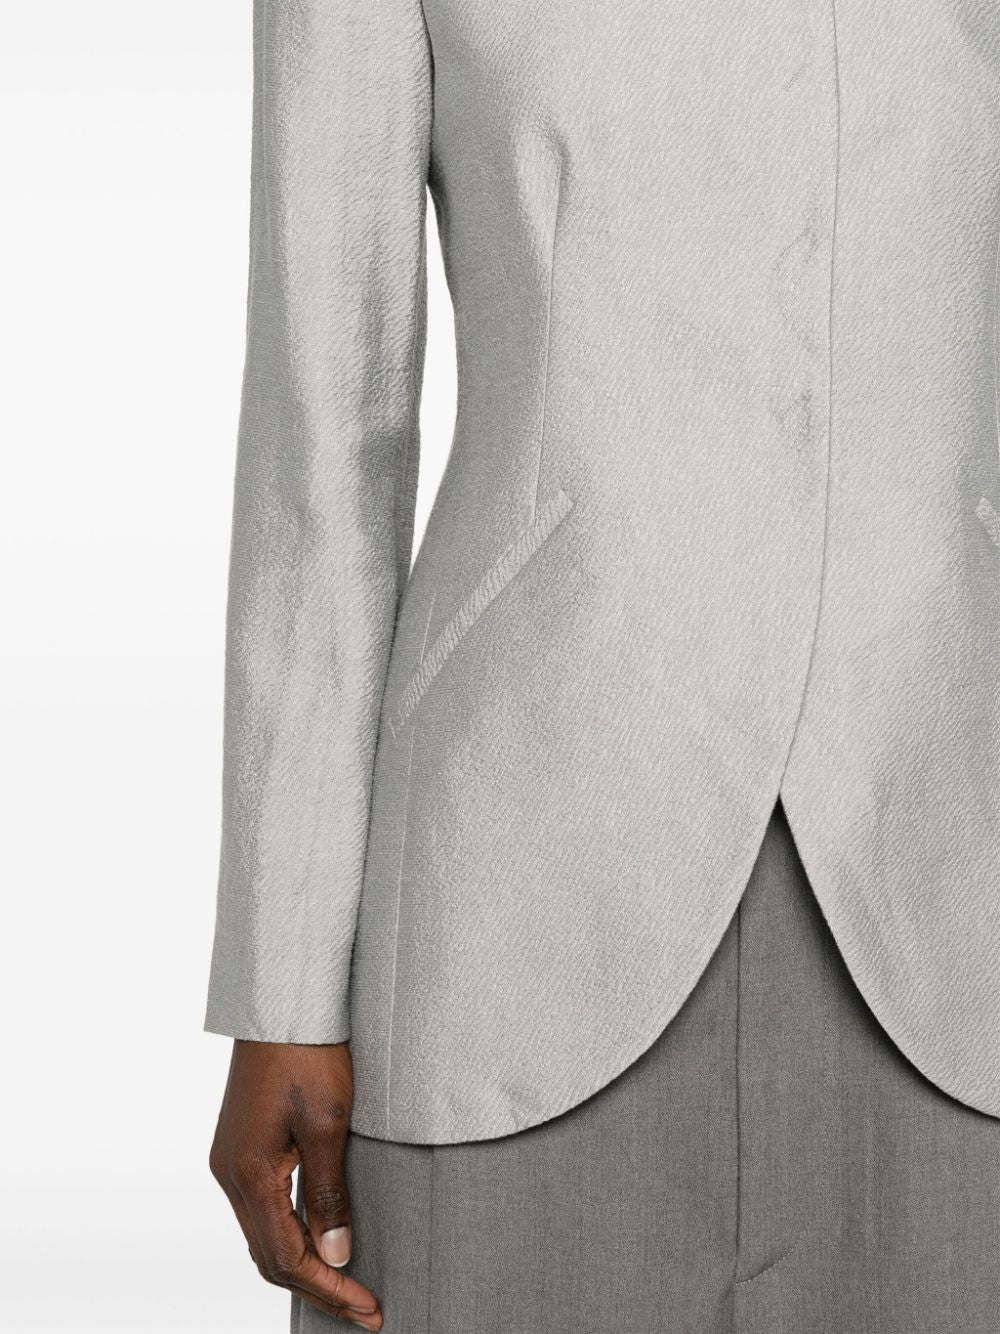 Heather Grey Textured Blazer Jacket with Dart Detailing and Faux Pocket for Women